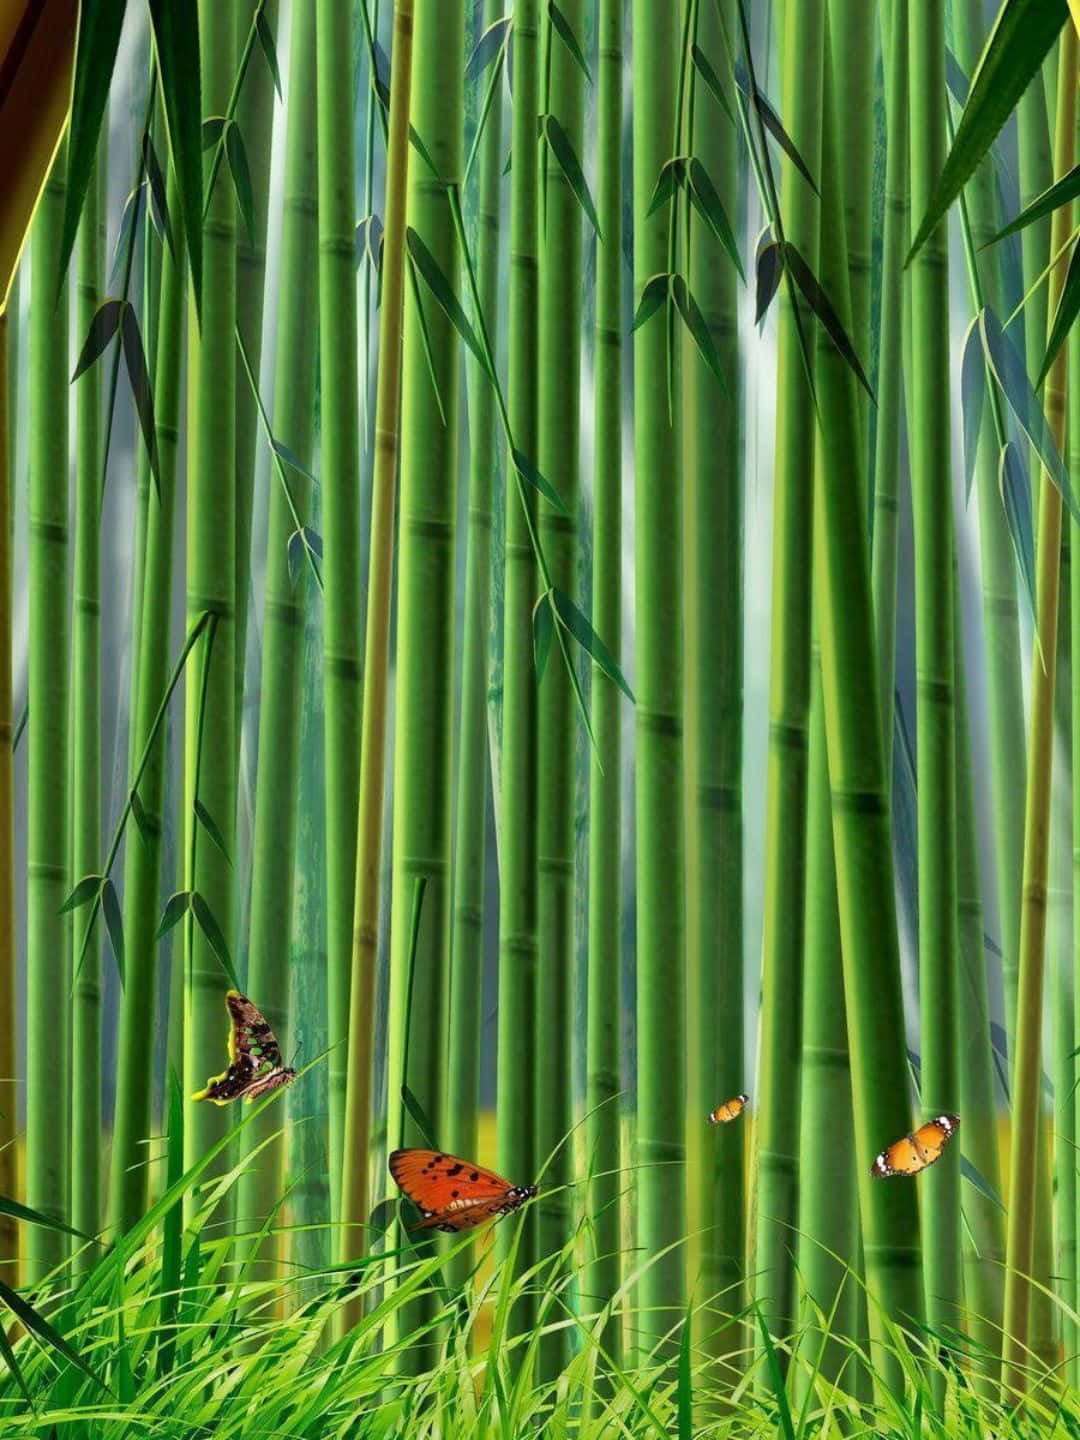 1440p Bamboo Background Fanart Painting With Butterflies